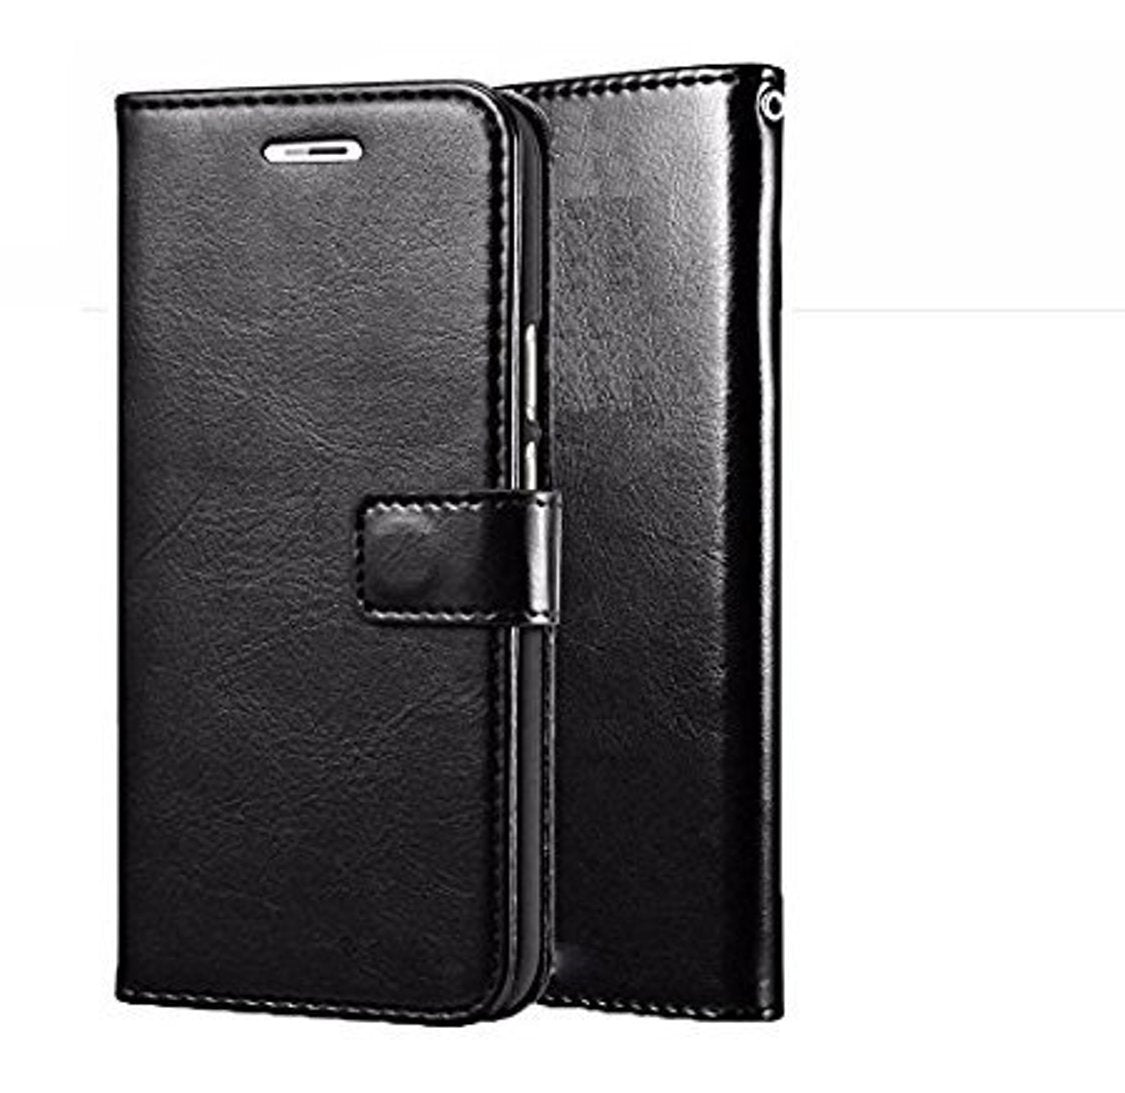 Oppo F7 Leather Flip Cover